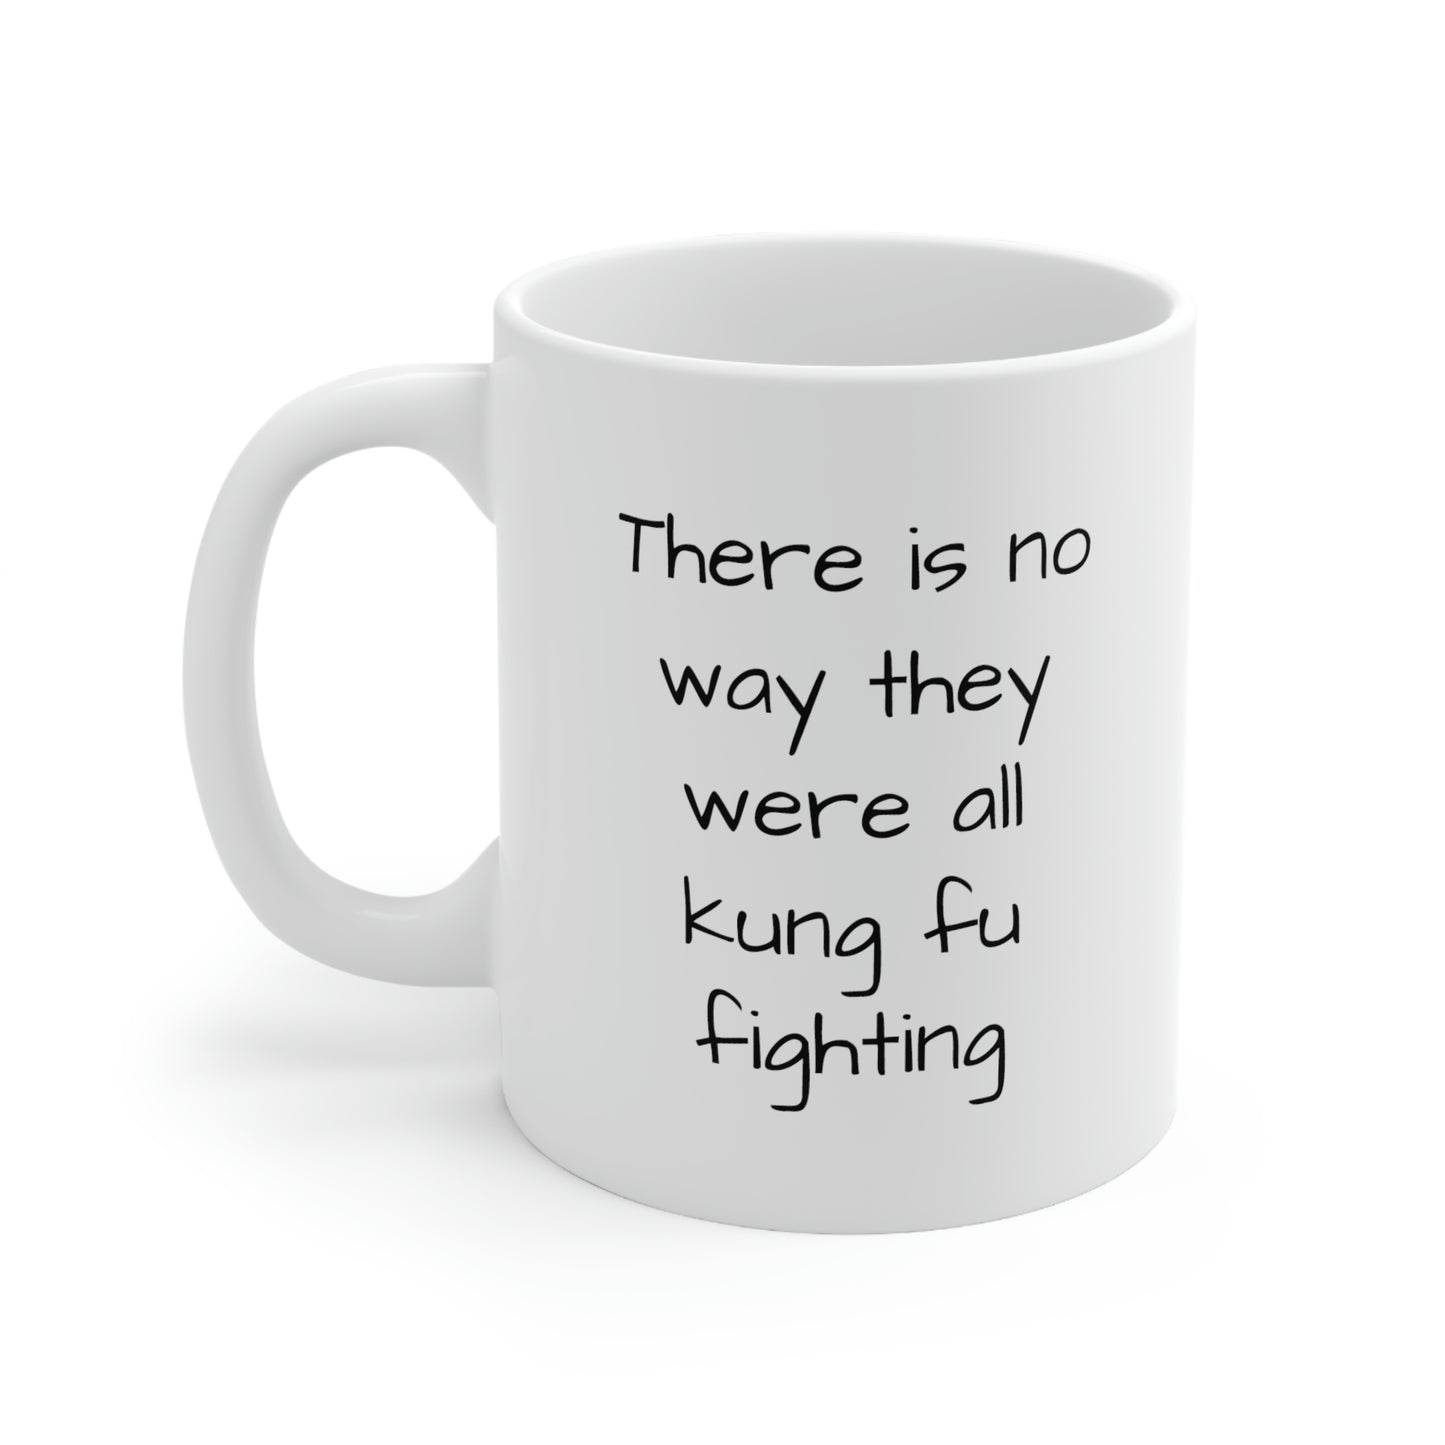 There is no way they were all kung fu fighting mug